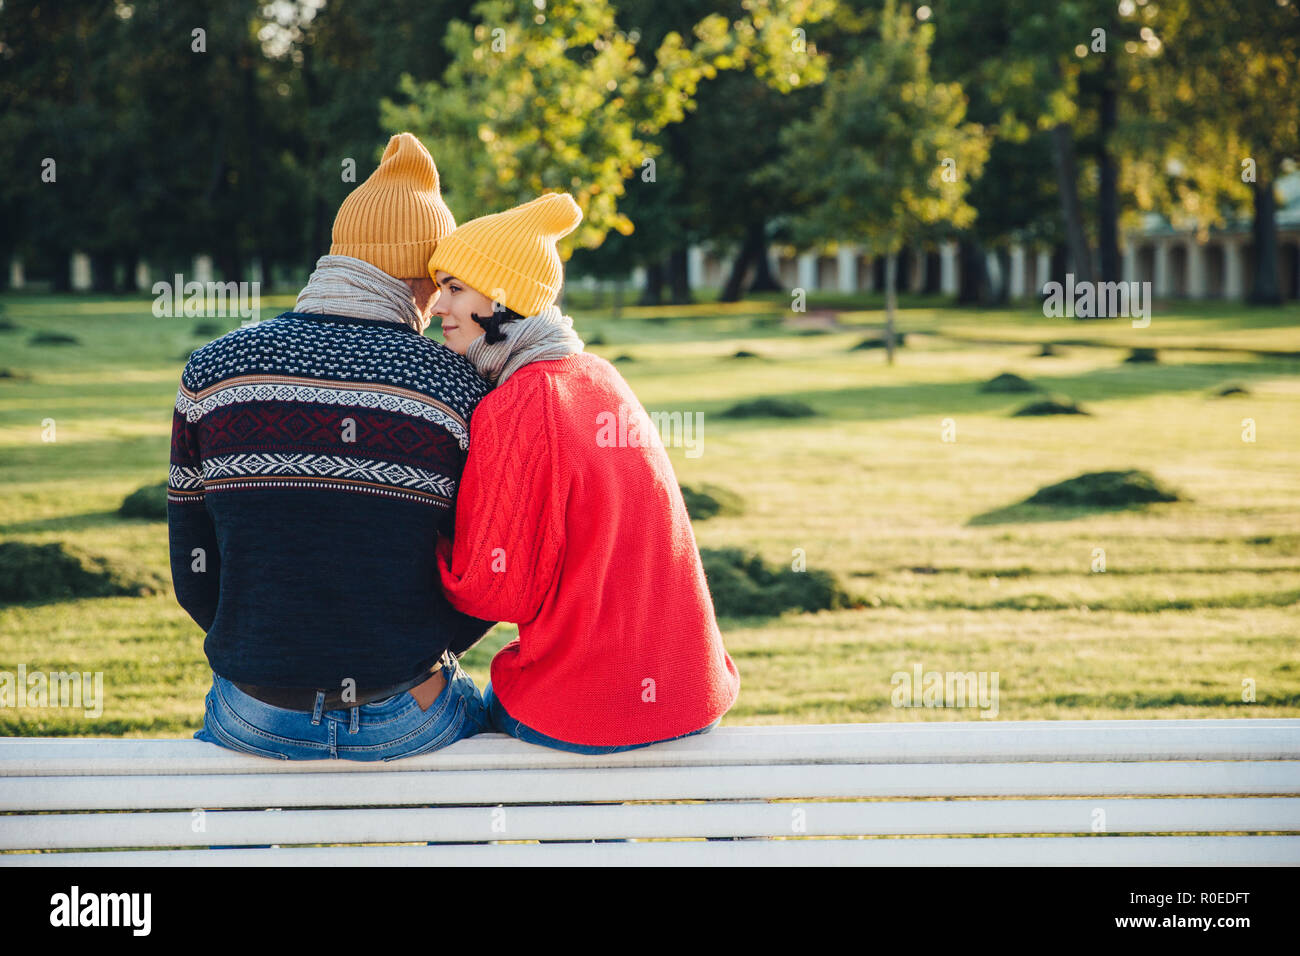 Lovely Moments Couple Couple Love Park Stock Photo 1143787256